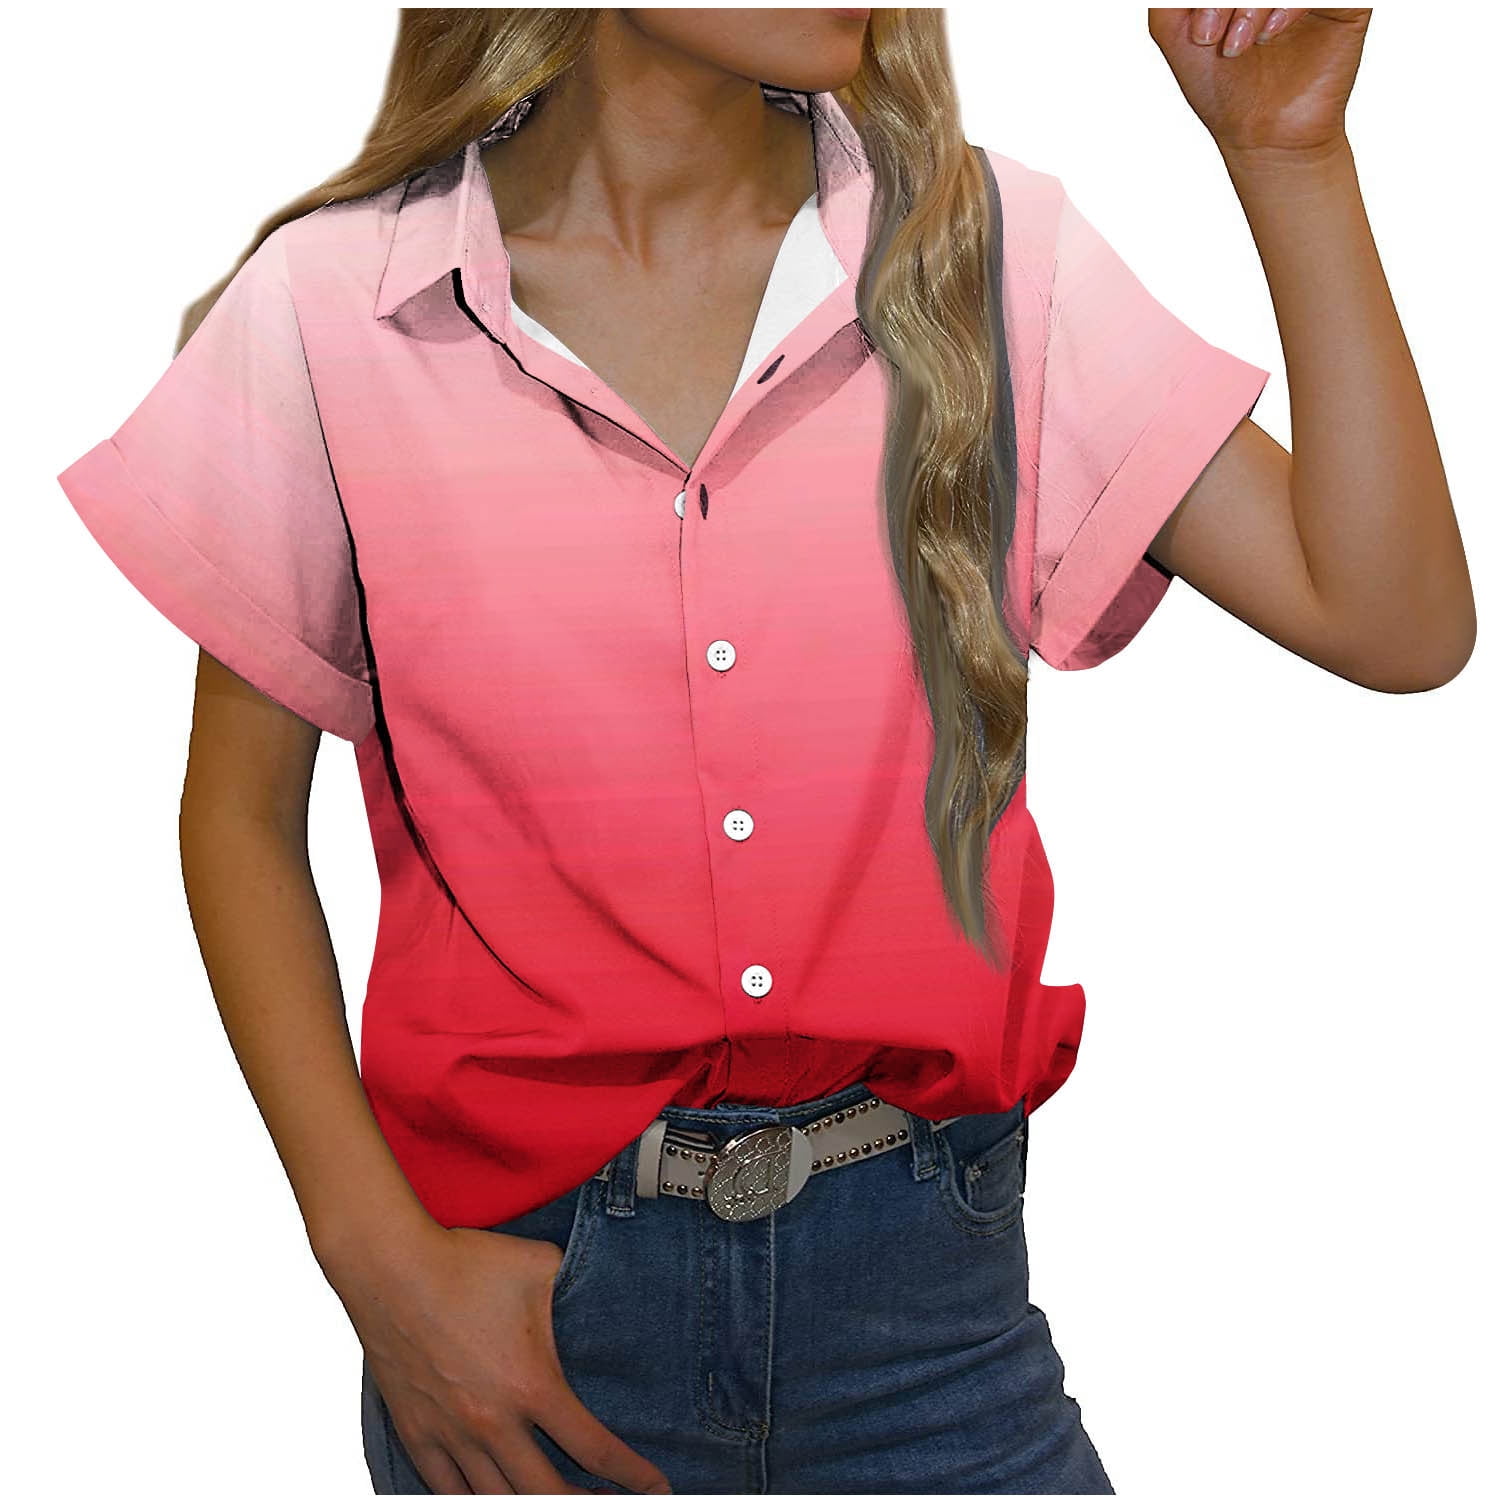 YYDGH Womens Casual Short Sleeve Button Down Shirts Summer Cotton Solid  Color Top Blouses with Pockets Hot Pink L 